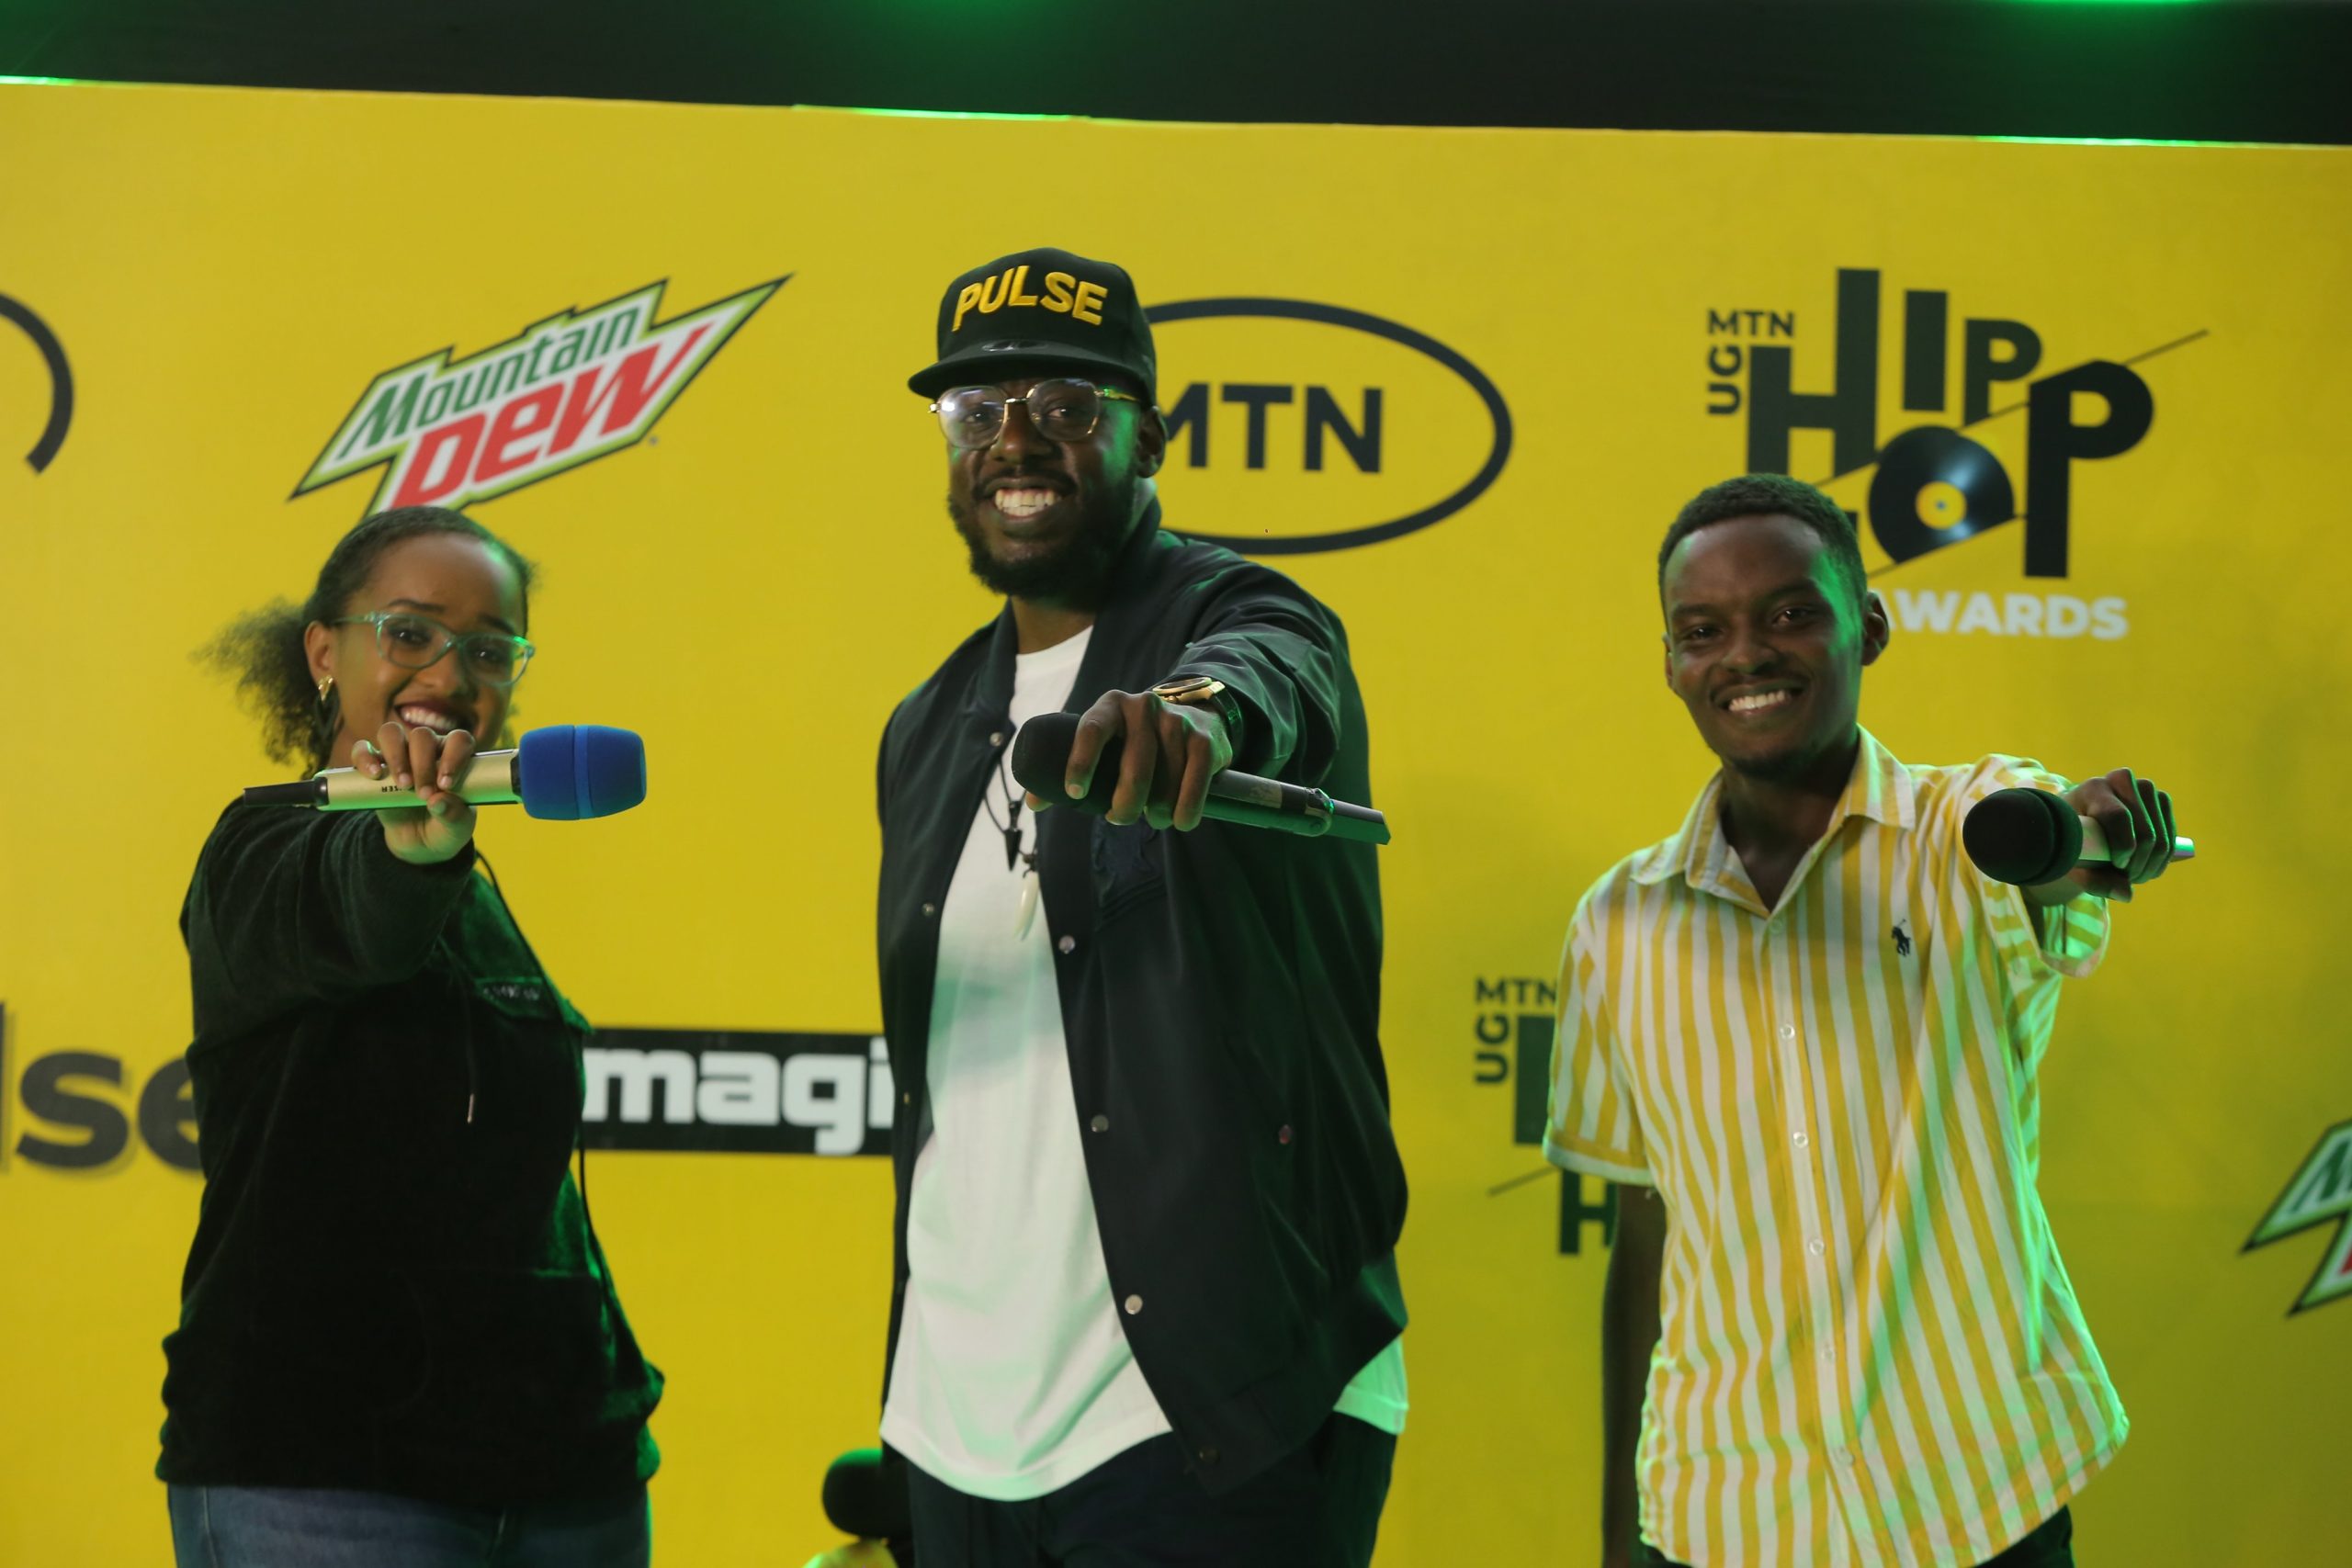 The MTN Pulse Hip Hop Awards 2022 were launched with pomp scaled